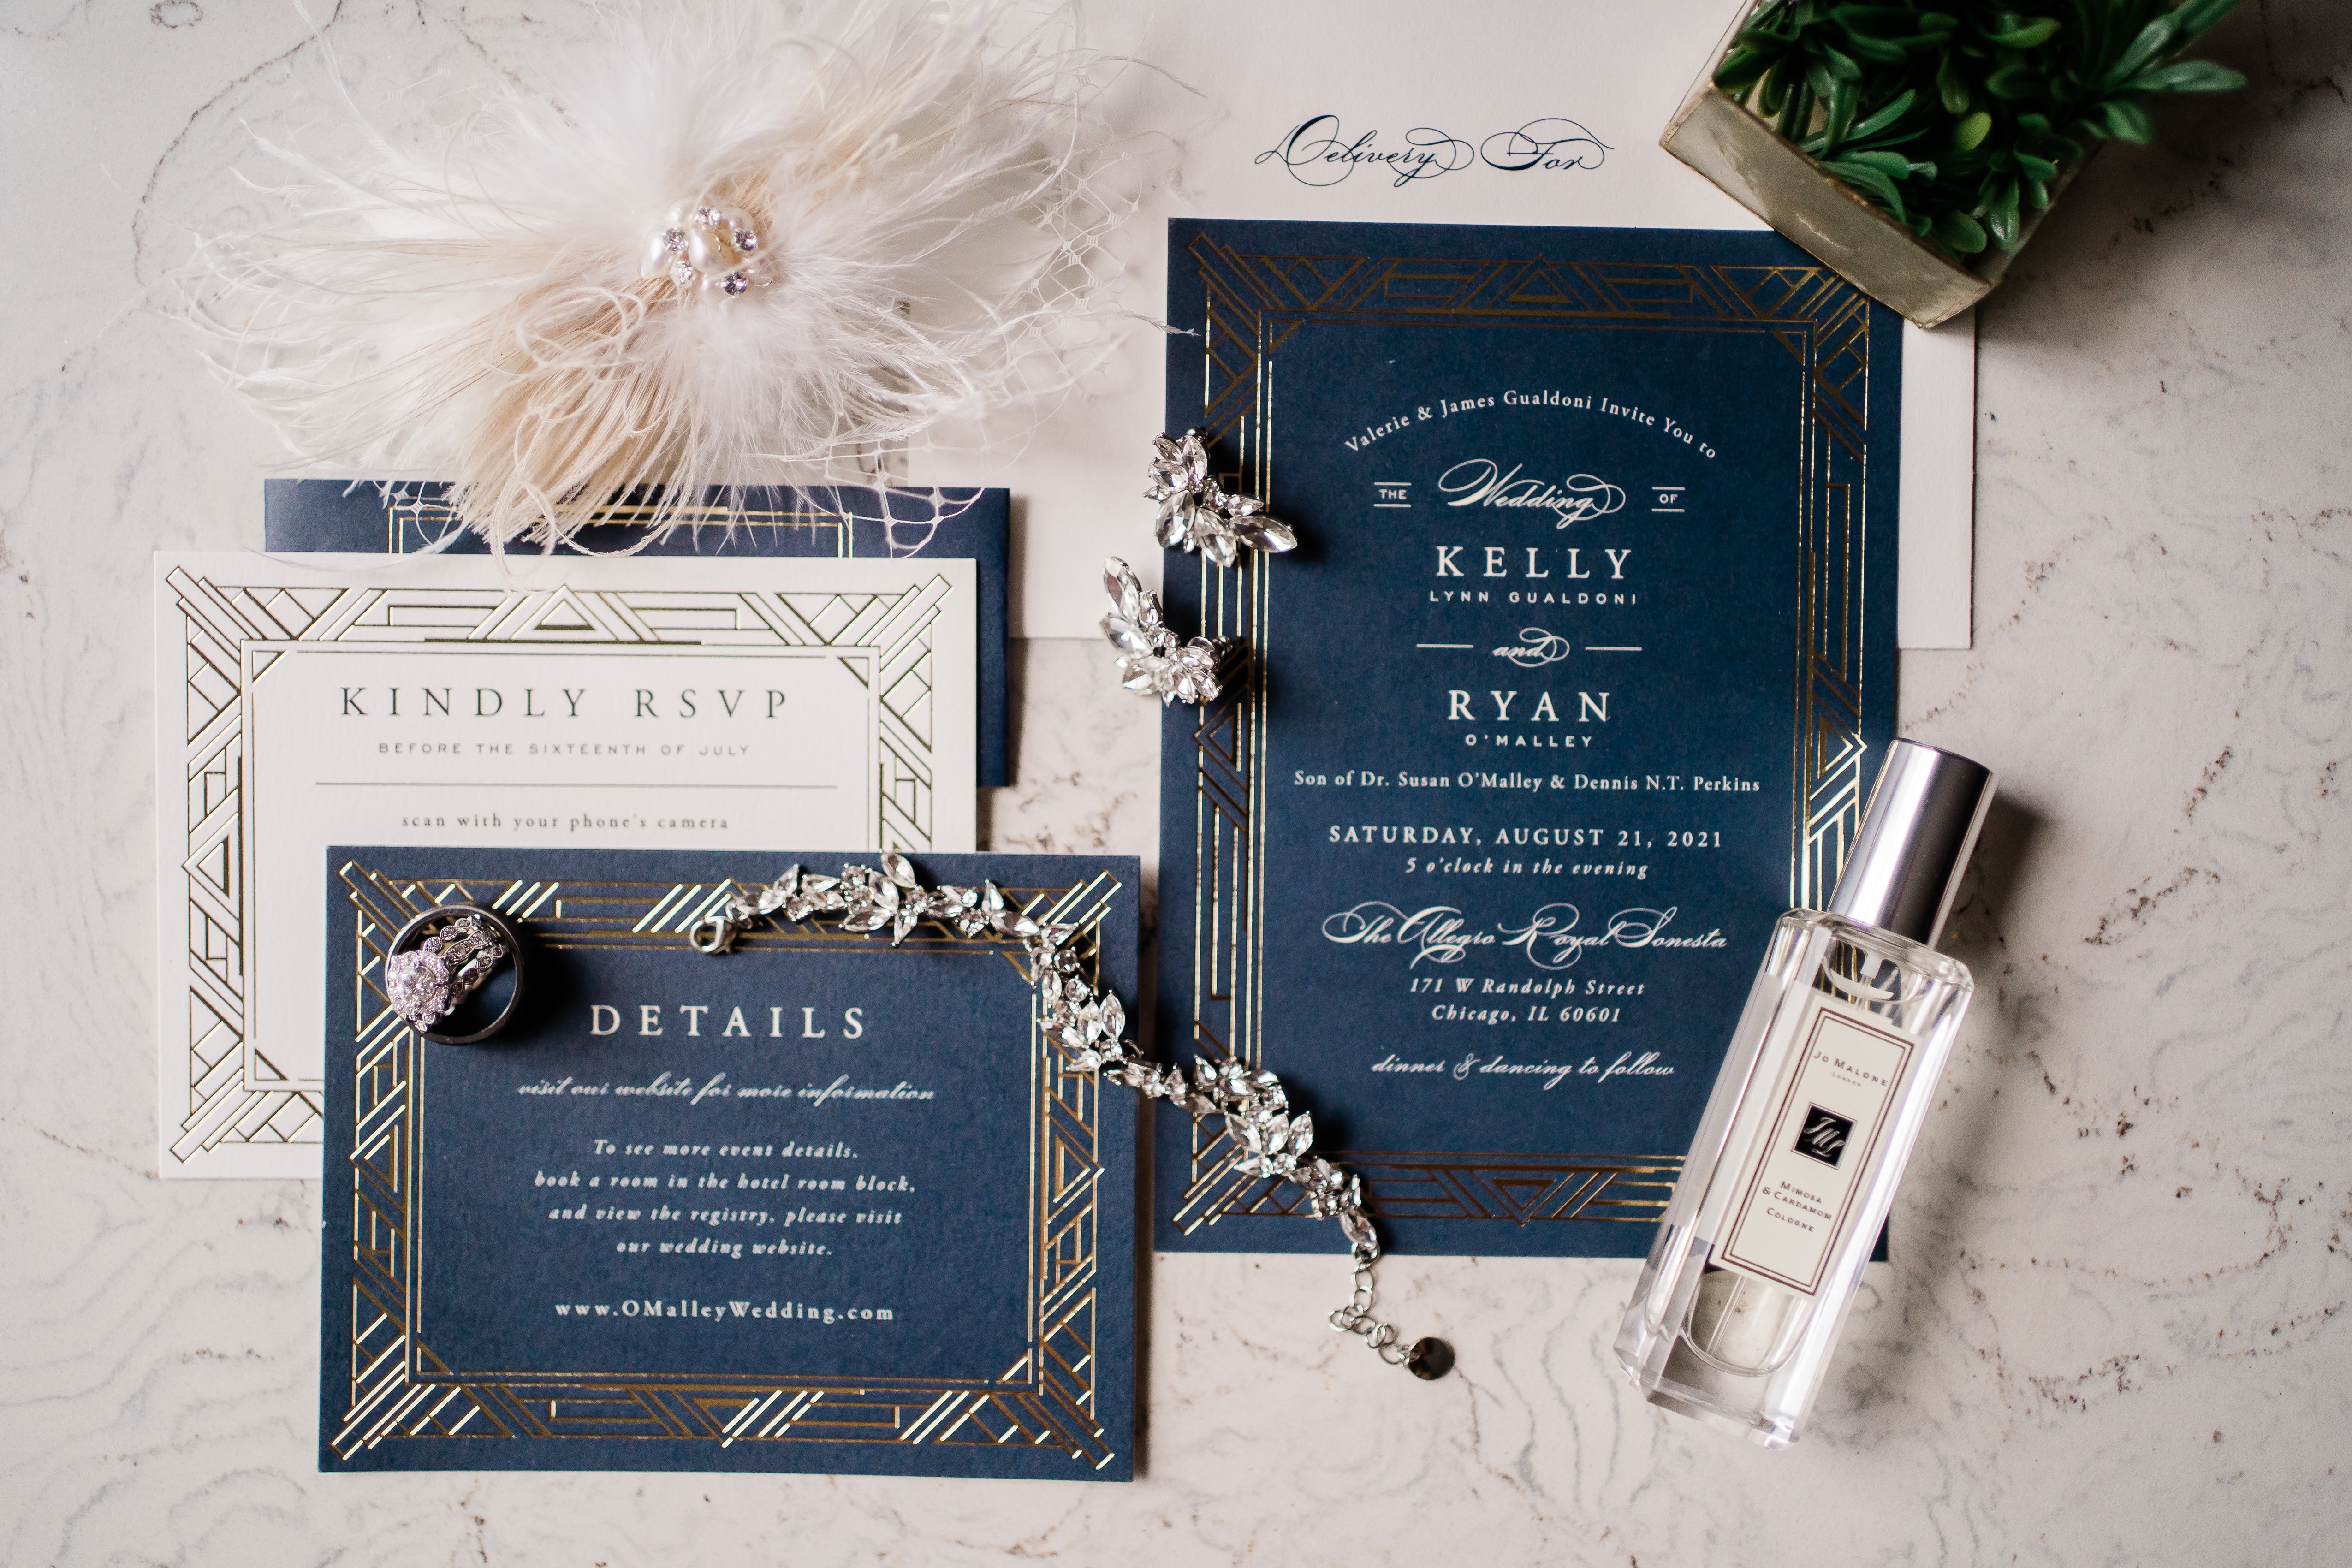 blue wedding invitations laid out with other wedding details on a white background for wedding flatlay photos